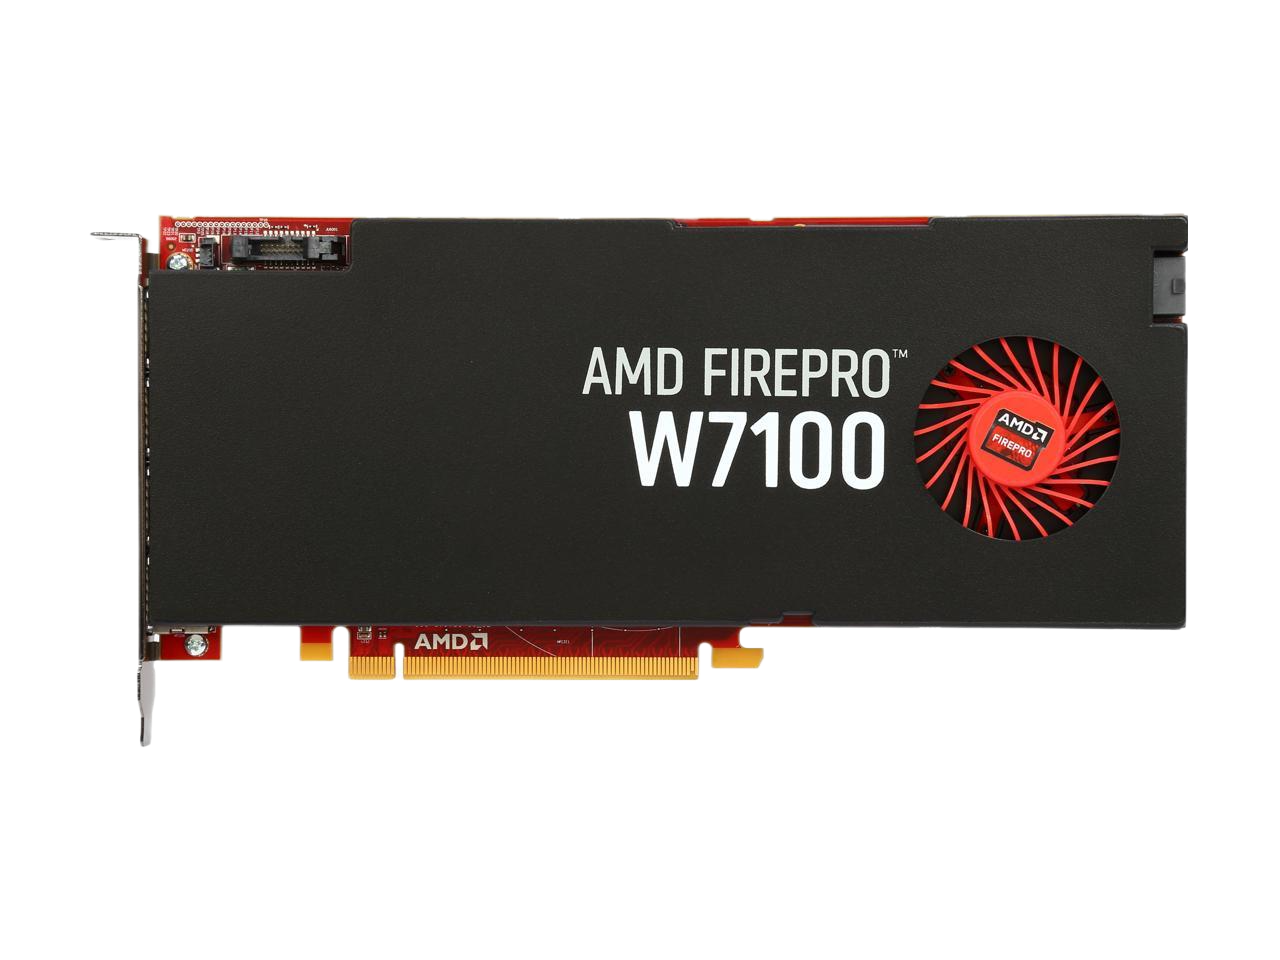 AMD FirePro W7100 8GB 256-bit GDDR5 PCI Express 3.0 x16 CrossFire Supported Full height/full length Workstation Graphics Cards 100-505975